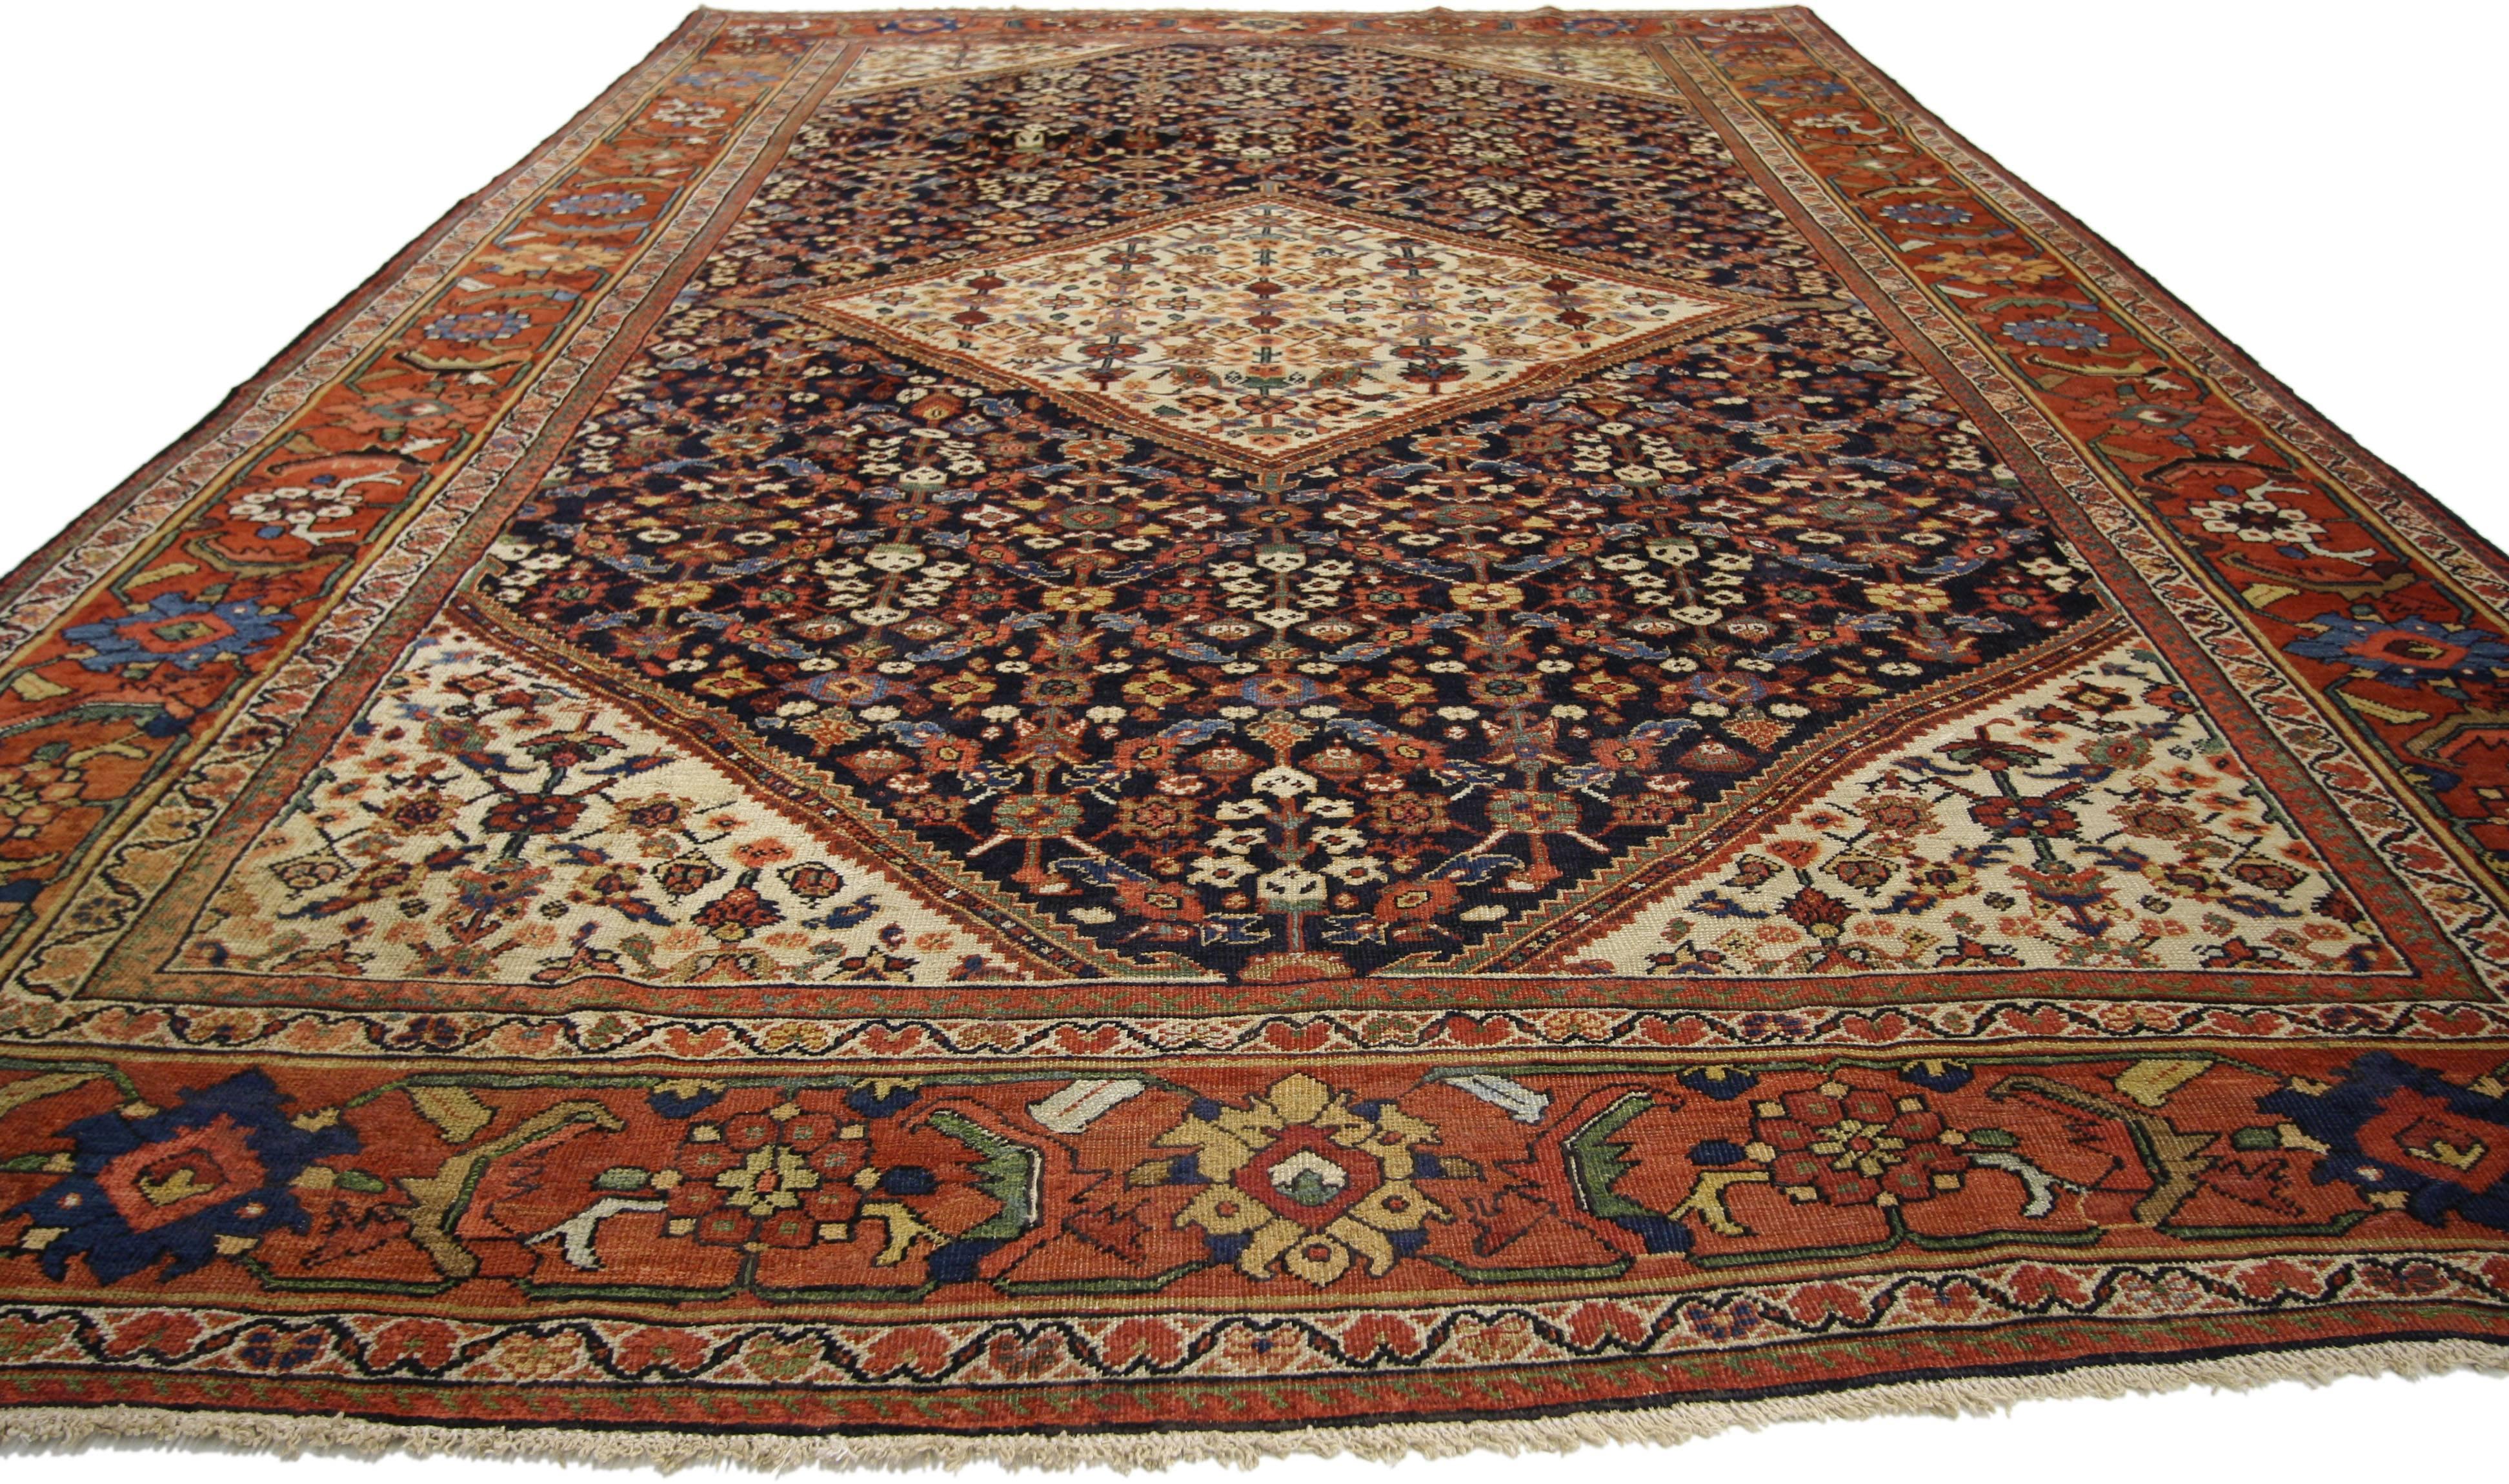 Sultanabad Modern Antique Persian Mahal Area Rug with Transitional Style